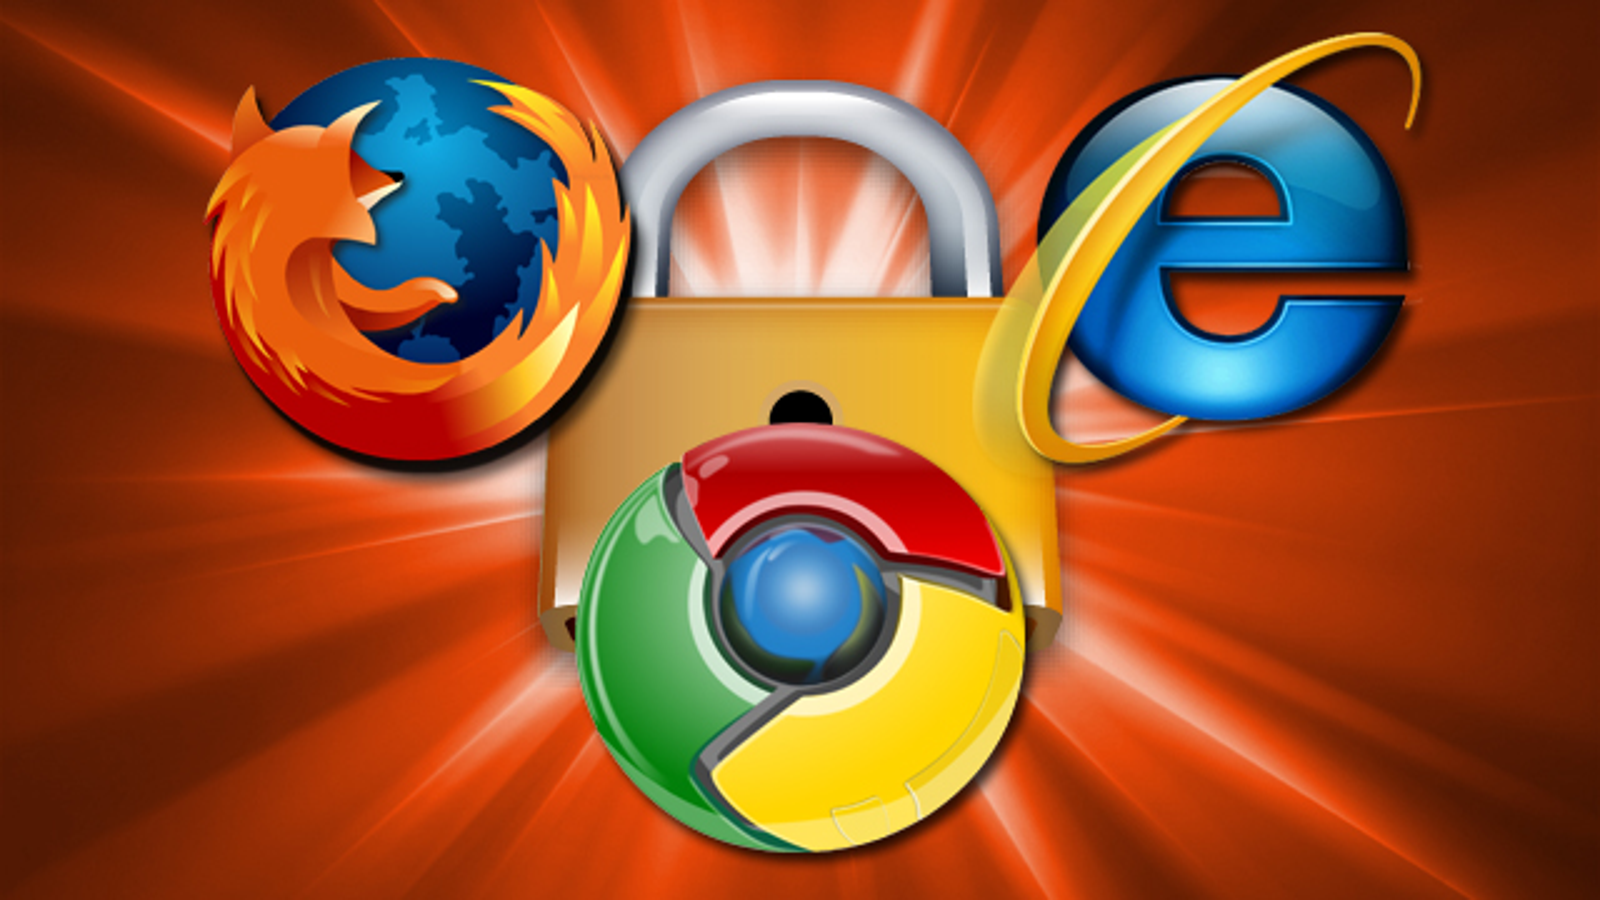 what is the most secure web browser for pc